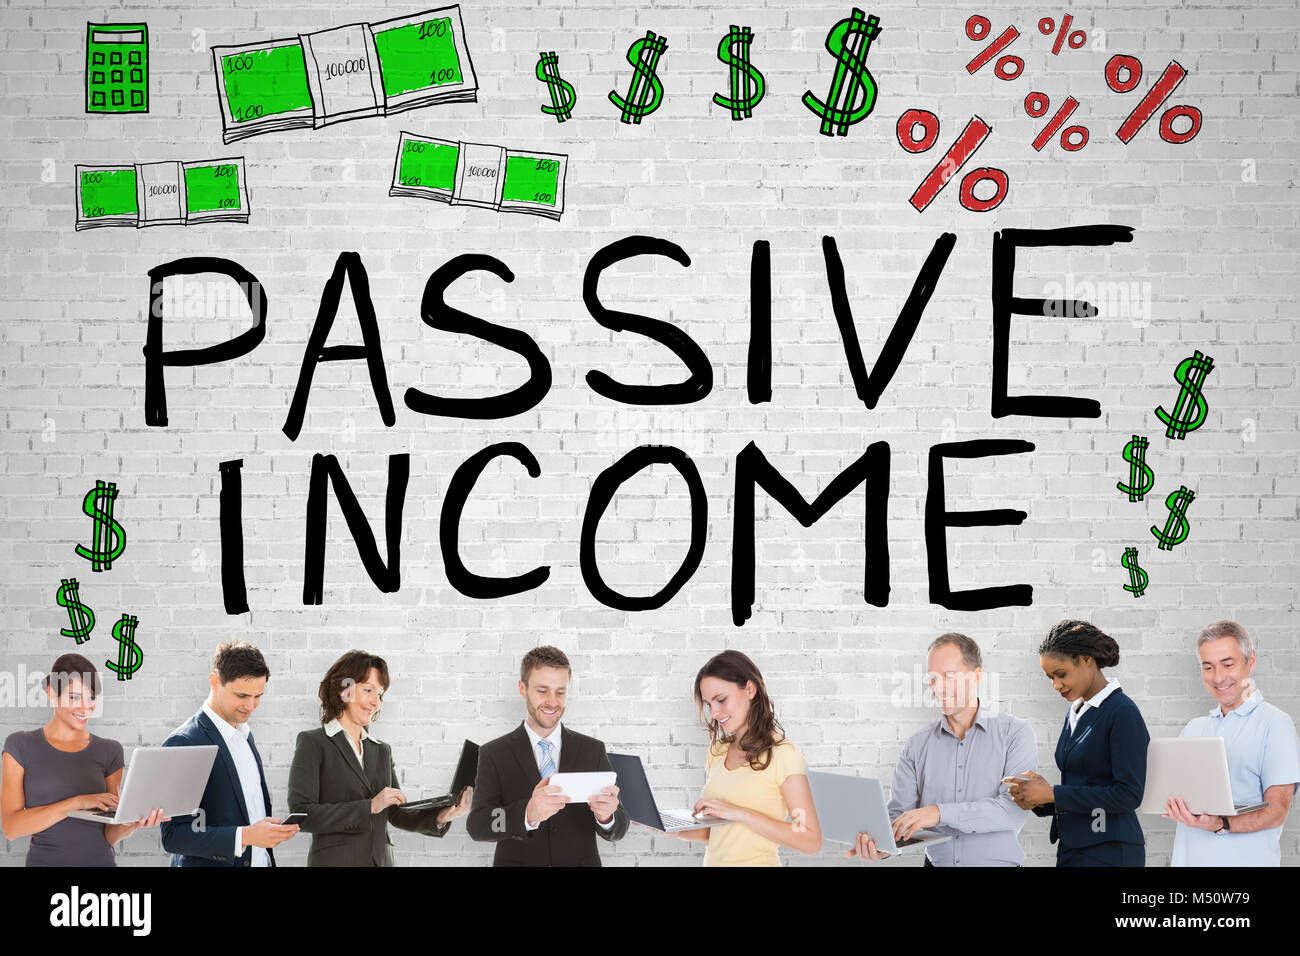 Diverse Group Of People In Front Of Passive Income Stock Photo